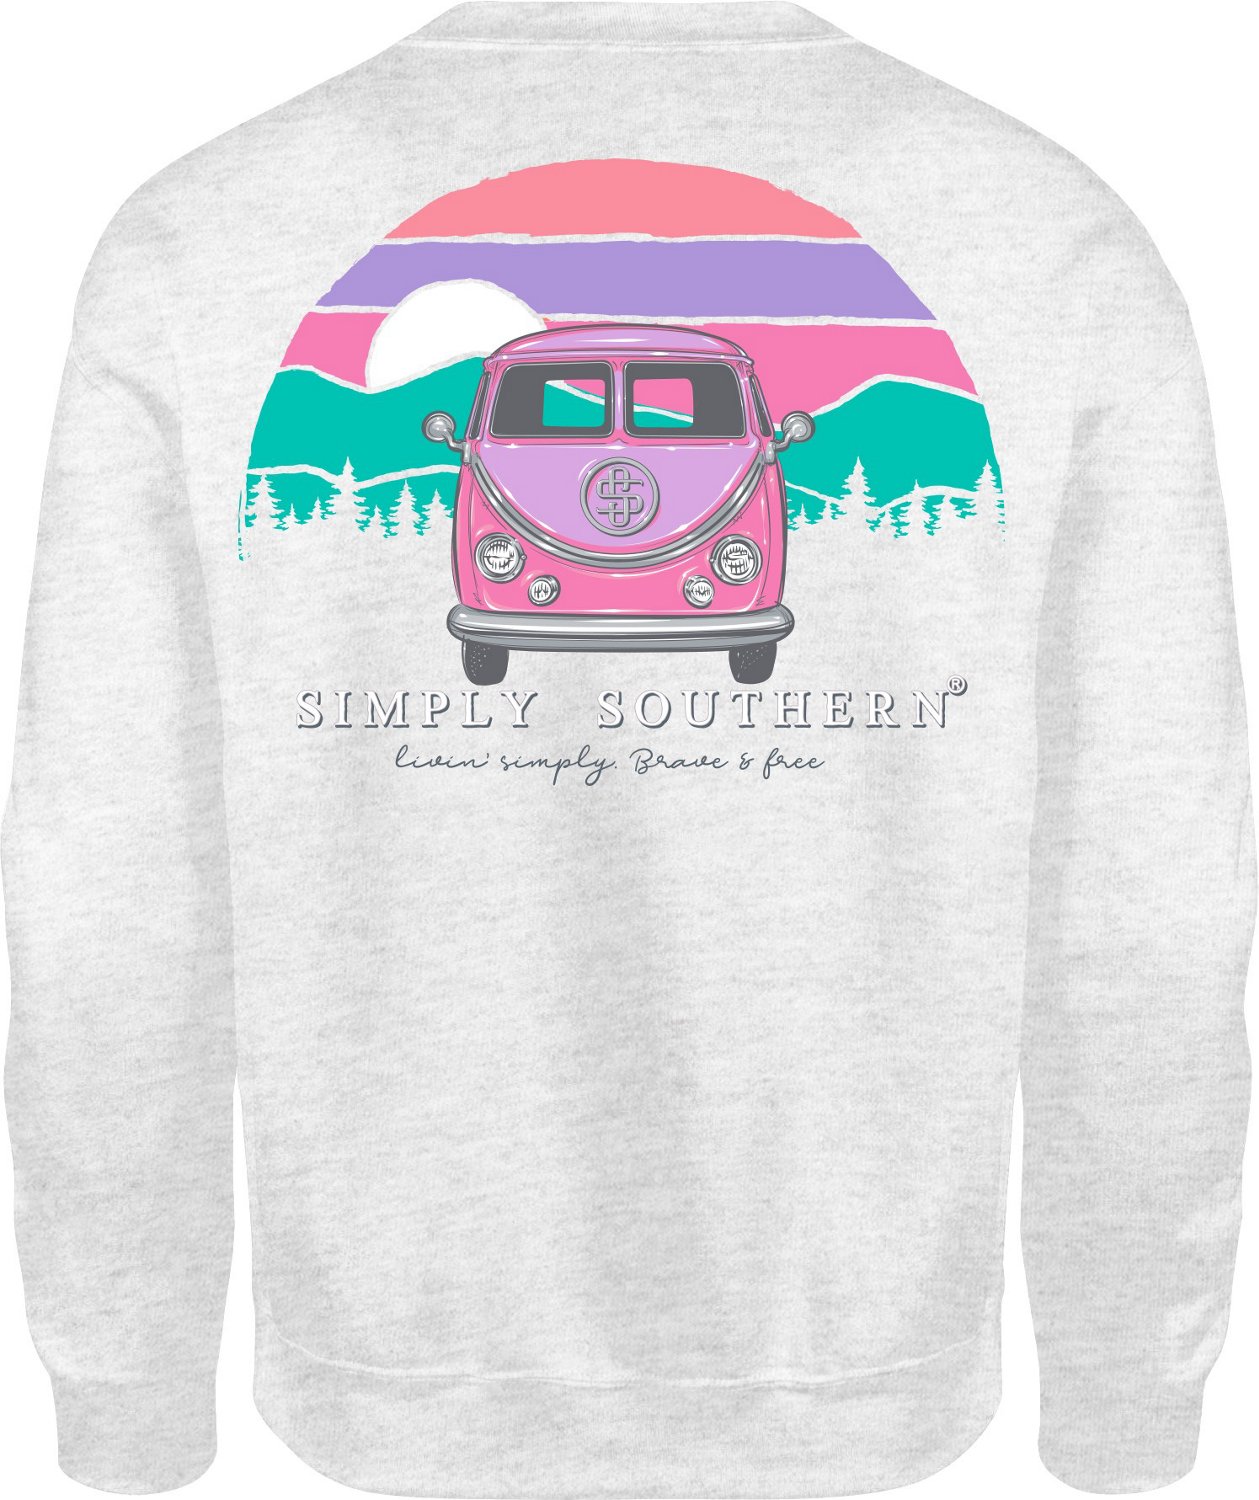 Simply Southern Women's Live Brave And Free Bus Fleece Crew Sweatshirt                                                           - view number 2